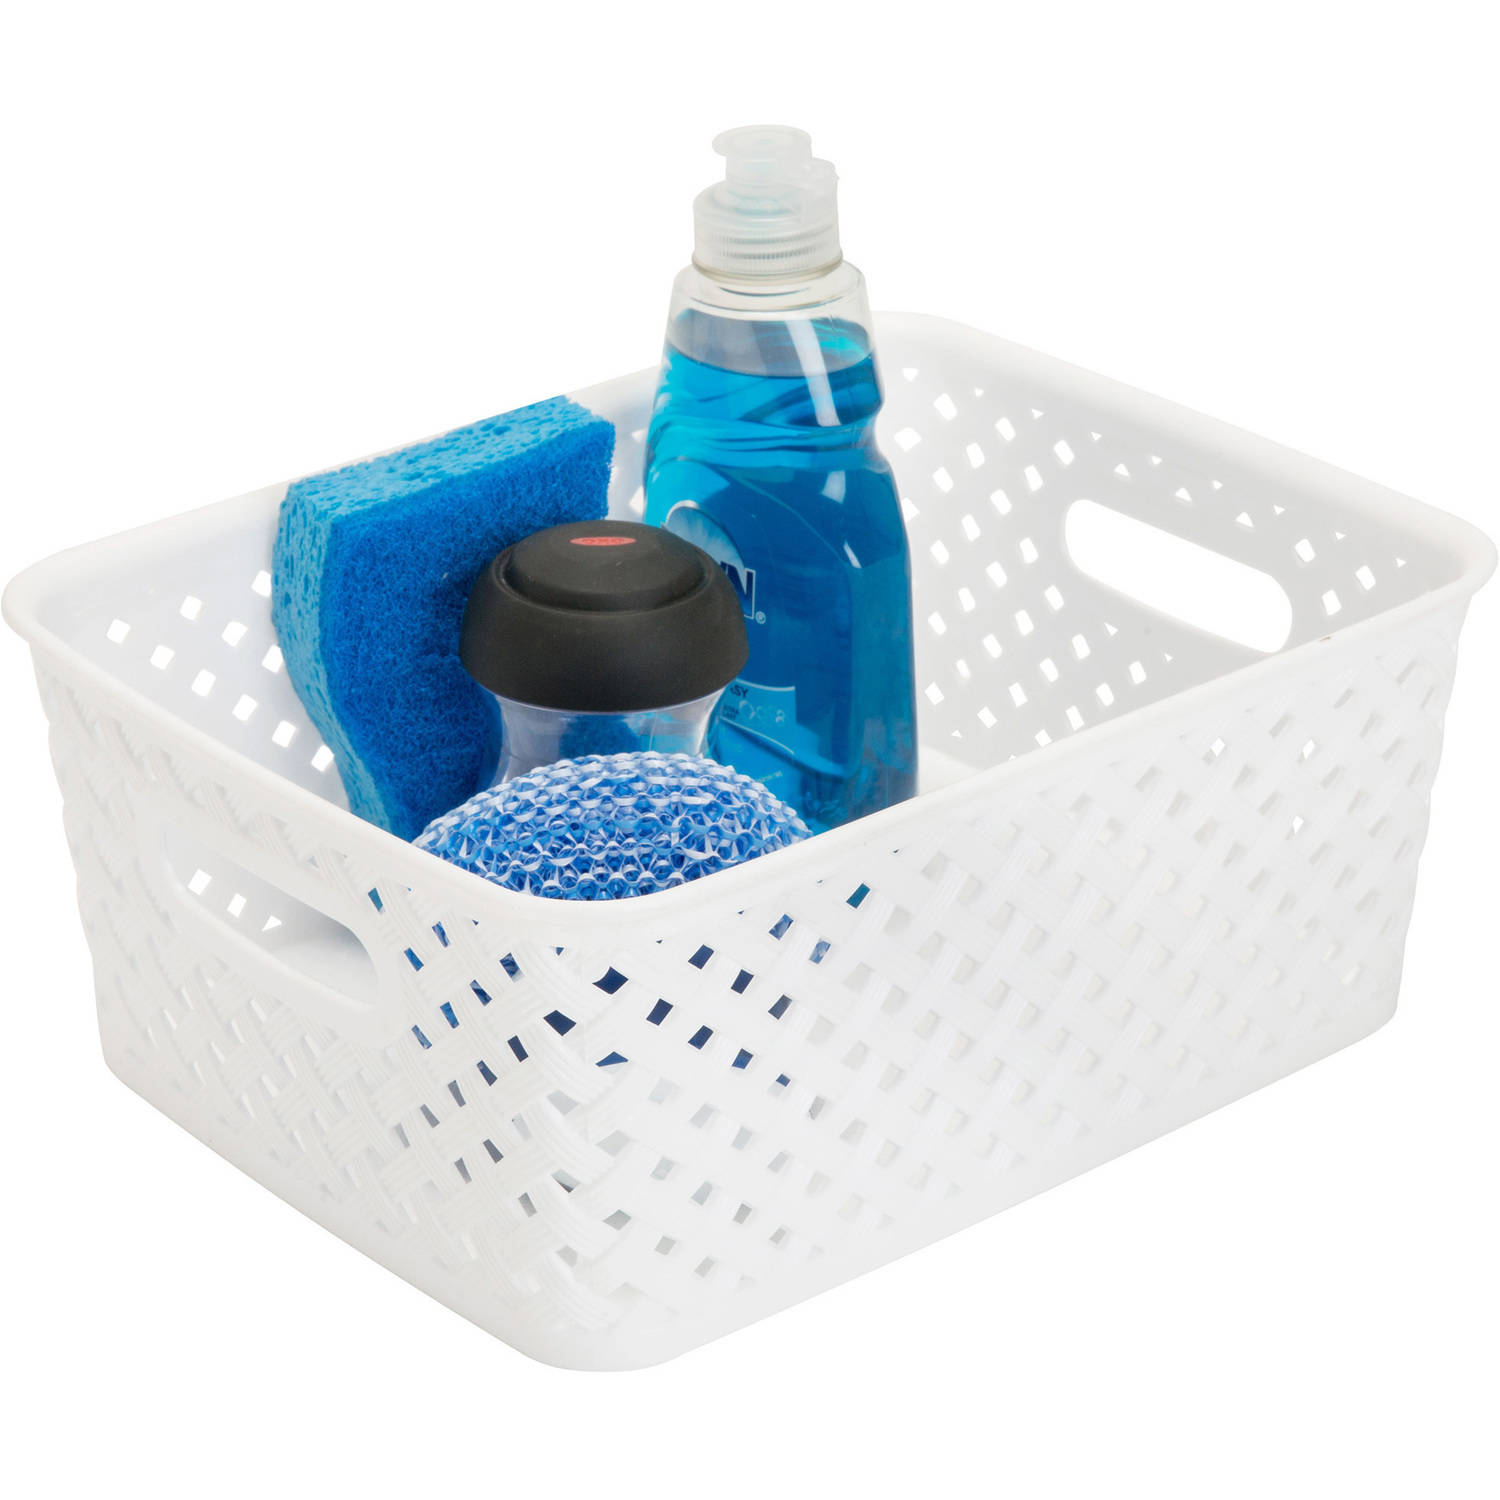 Simplify Small Resin Wicker Storage Basket in White (10 x 8 x 4") - image 3 of 5